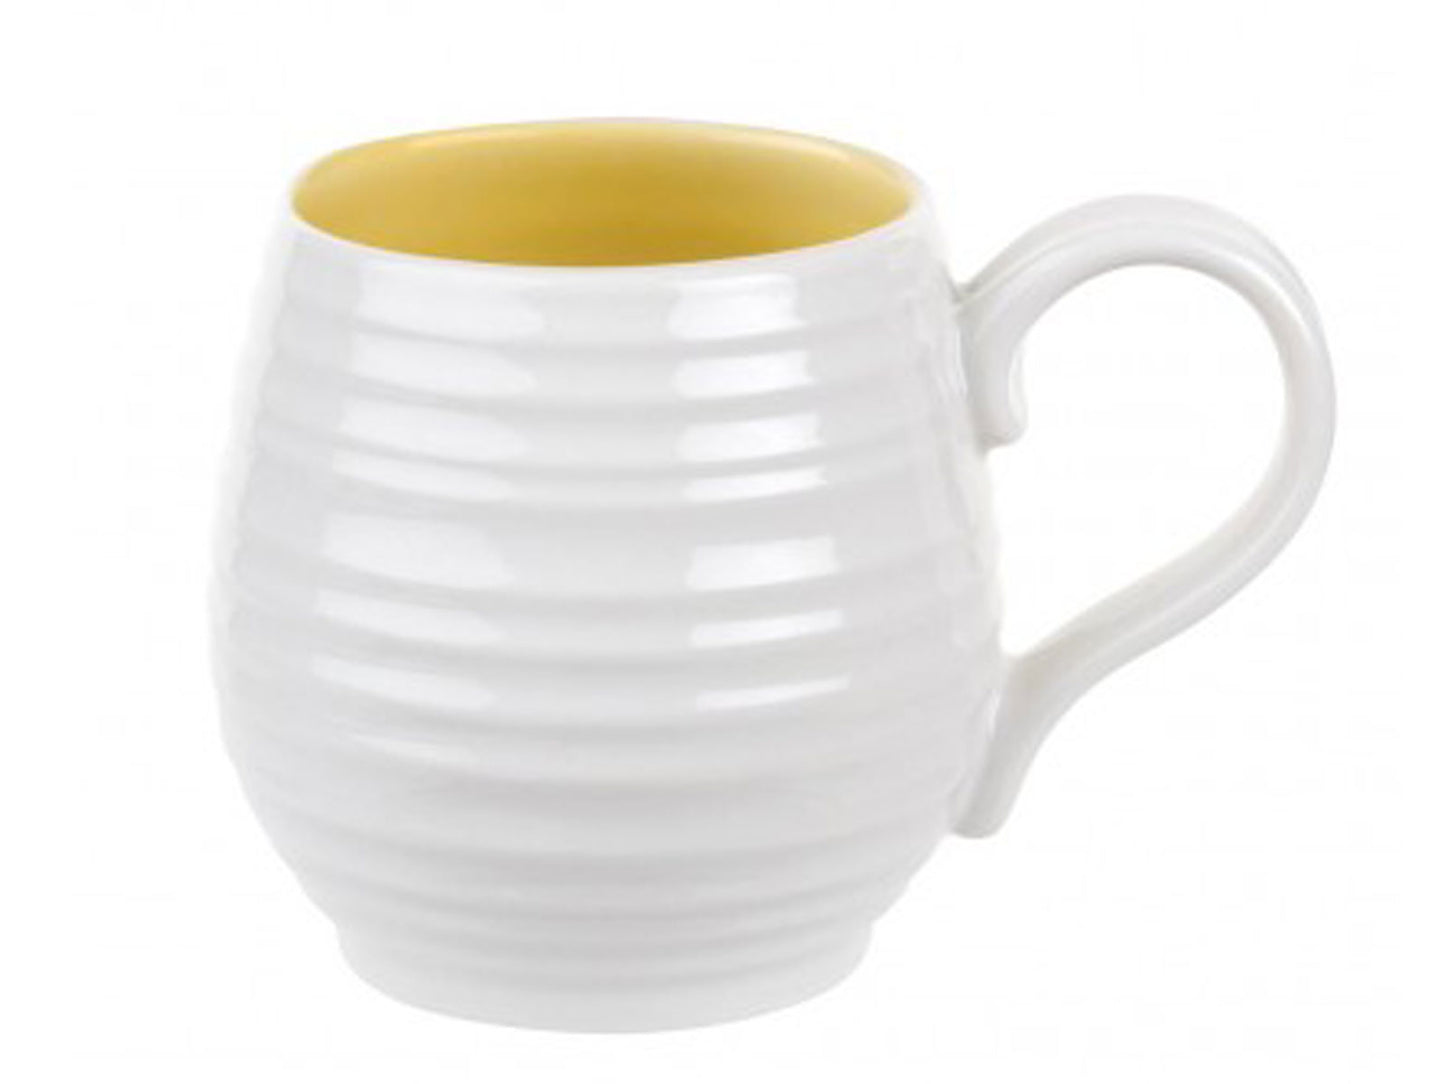 The Sophie Conran Sunshine Honey Pot Mug is made of white porcelain with a rippled texture and yellow interior